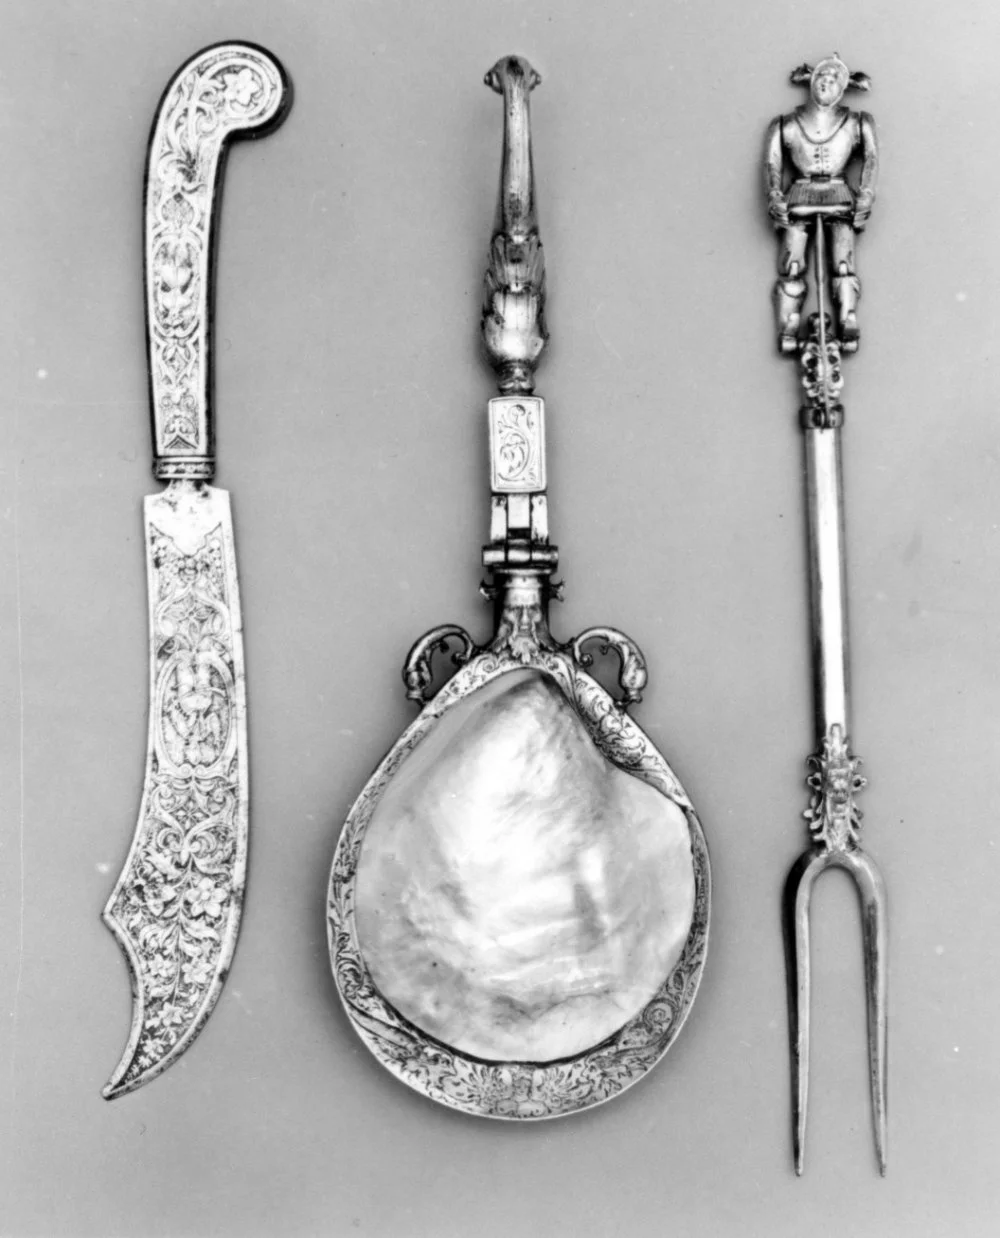 Knife, spoon and two-pronged fork from 16th century/MET